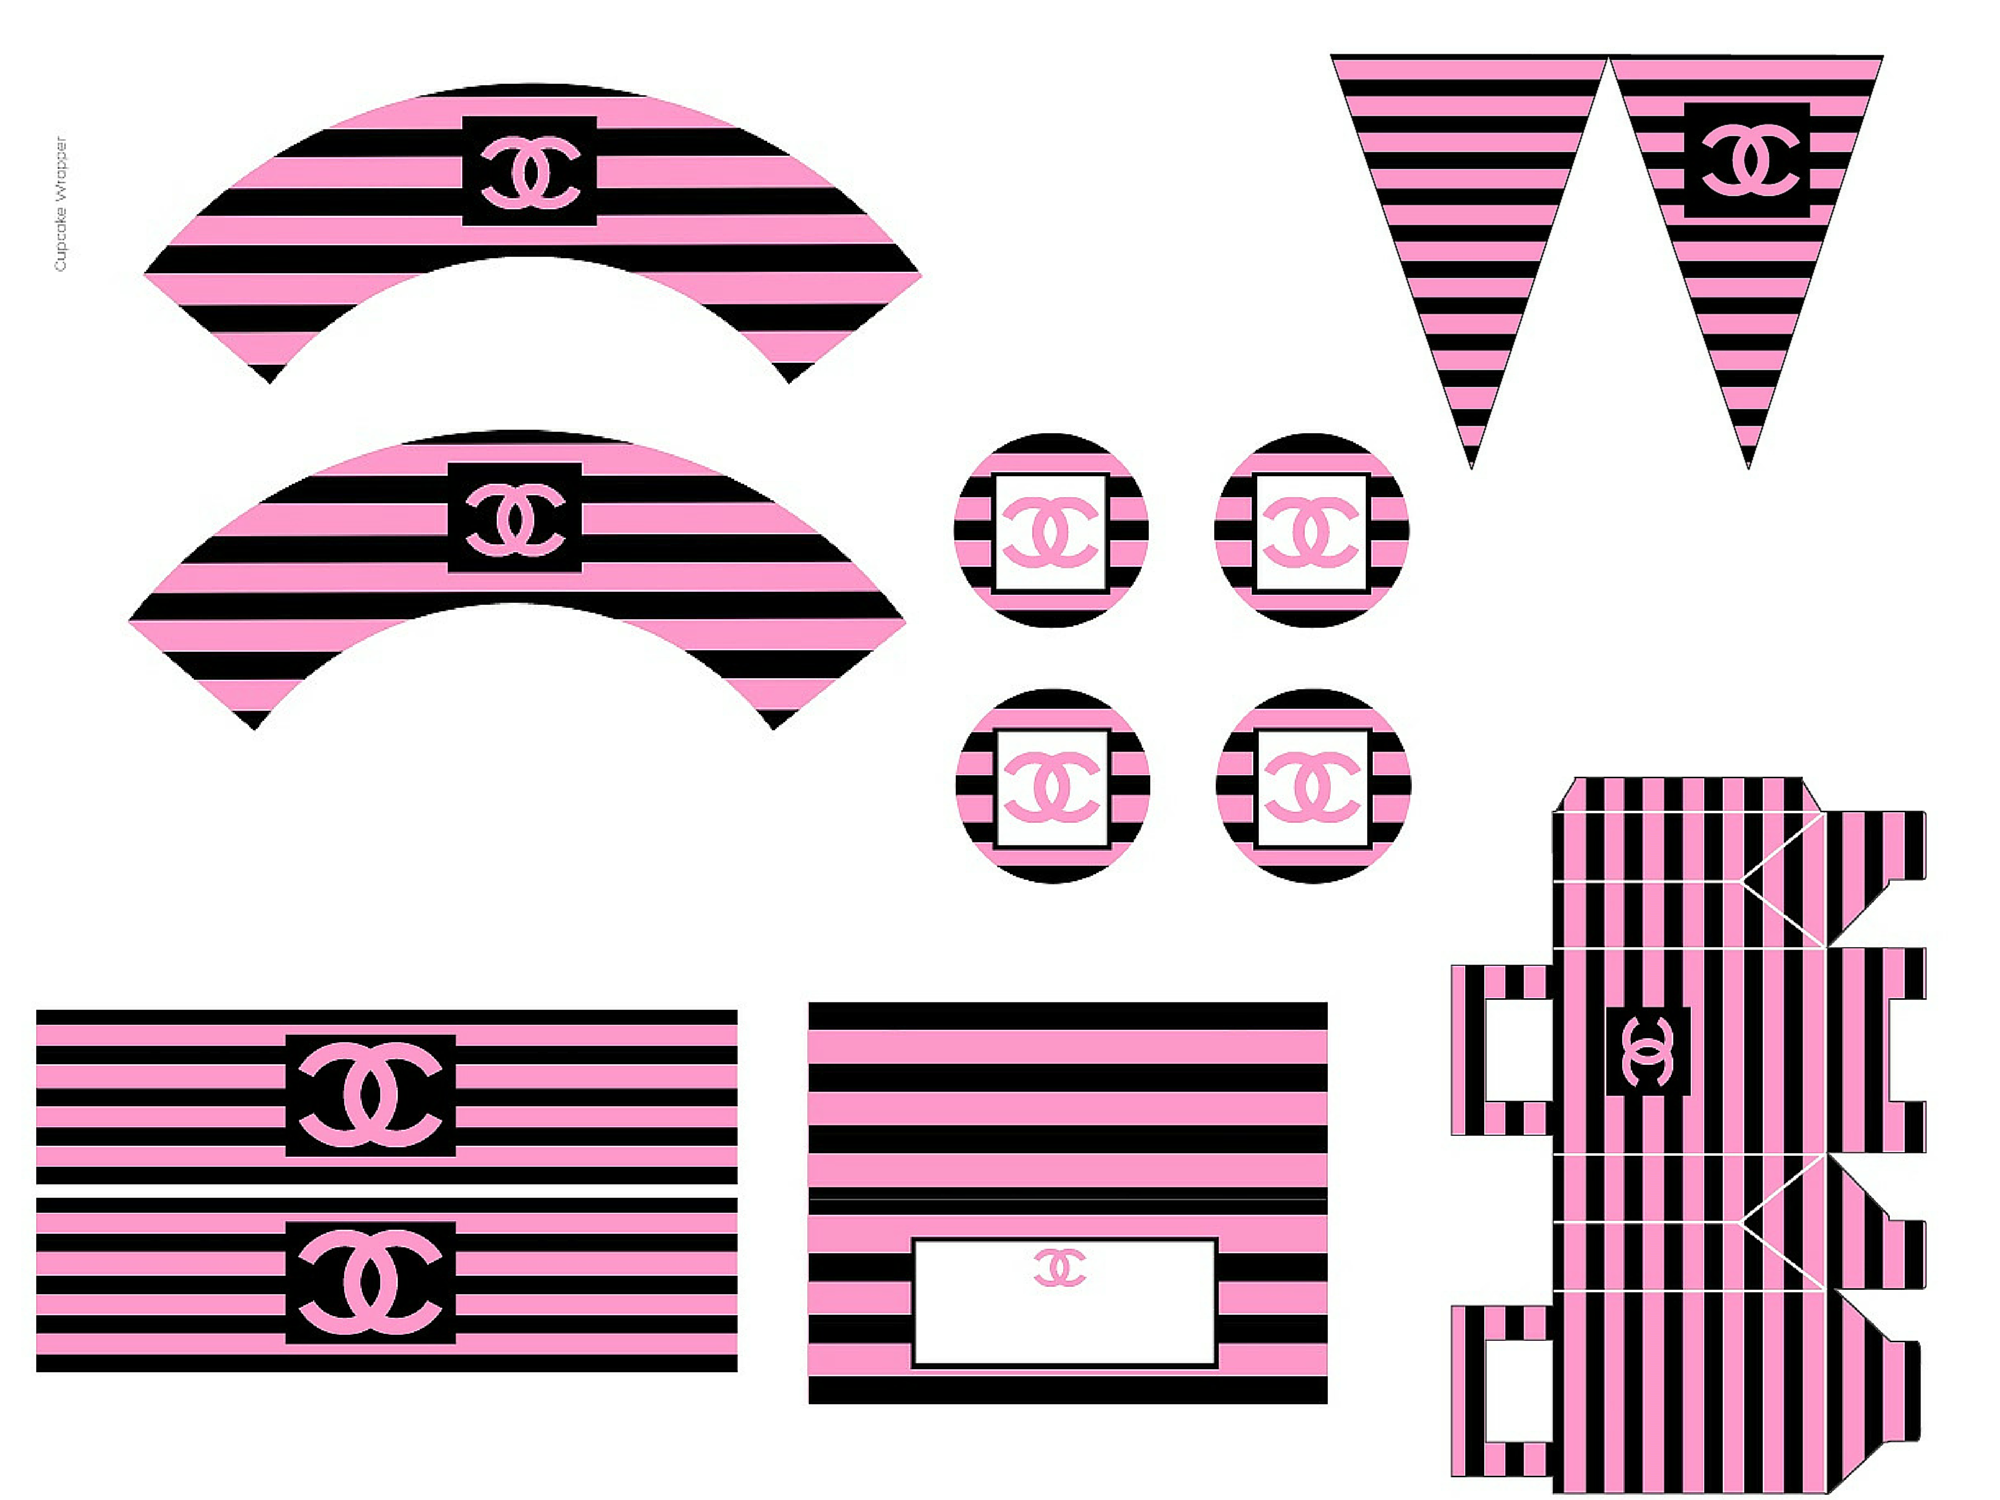 pink and black chanel logo